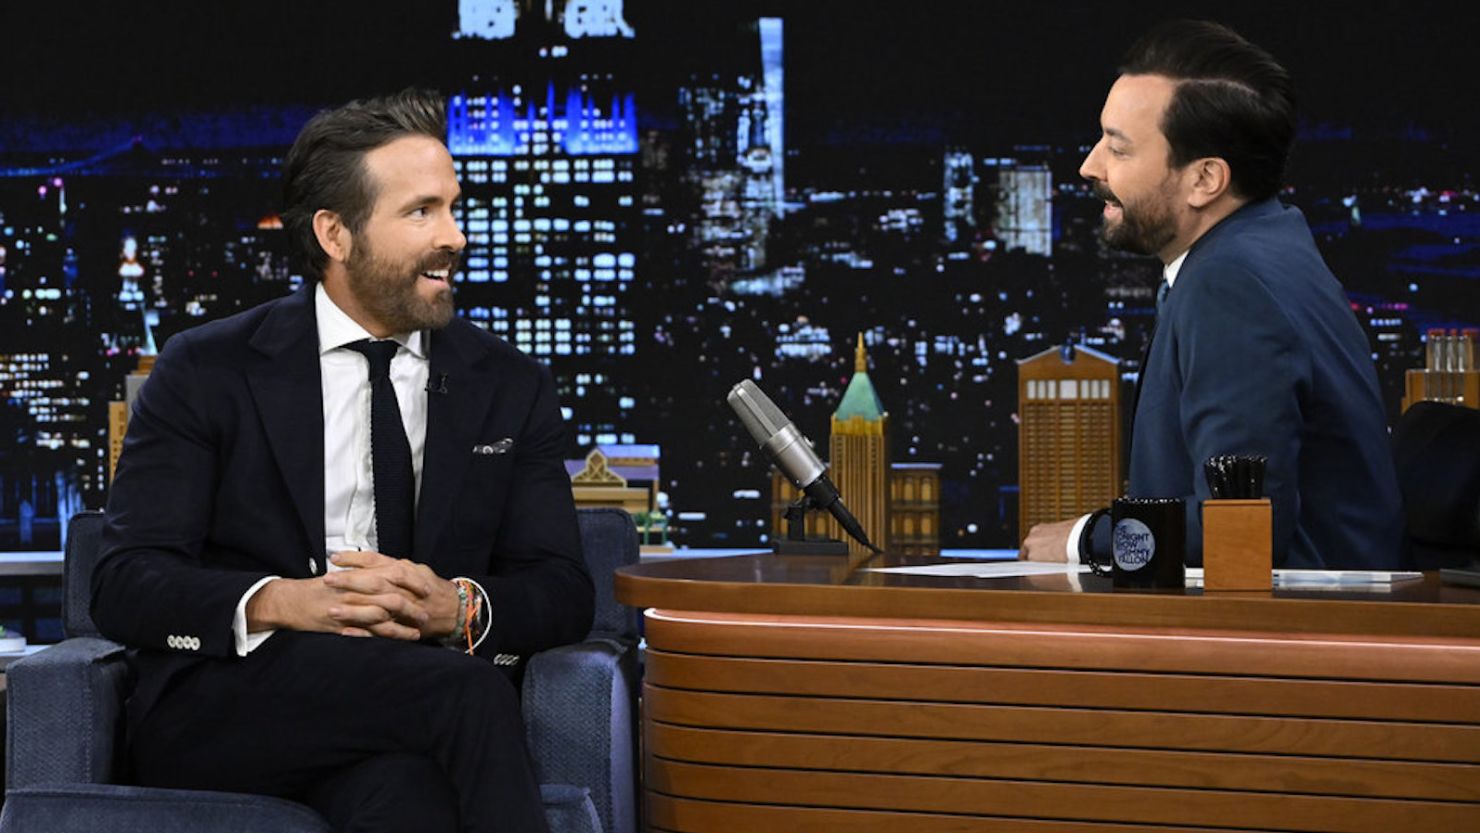 Actor Ryan Reynolds told Jimmy Fallon that he's interested in purchasing the NHL's Ottawa Senators during an interview on November 7.